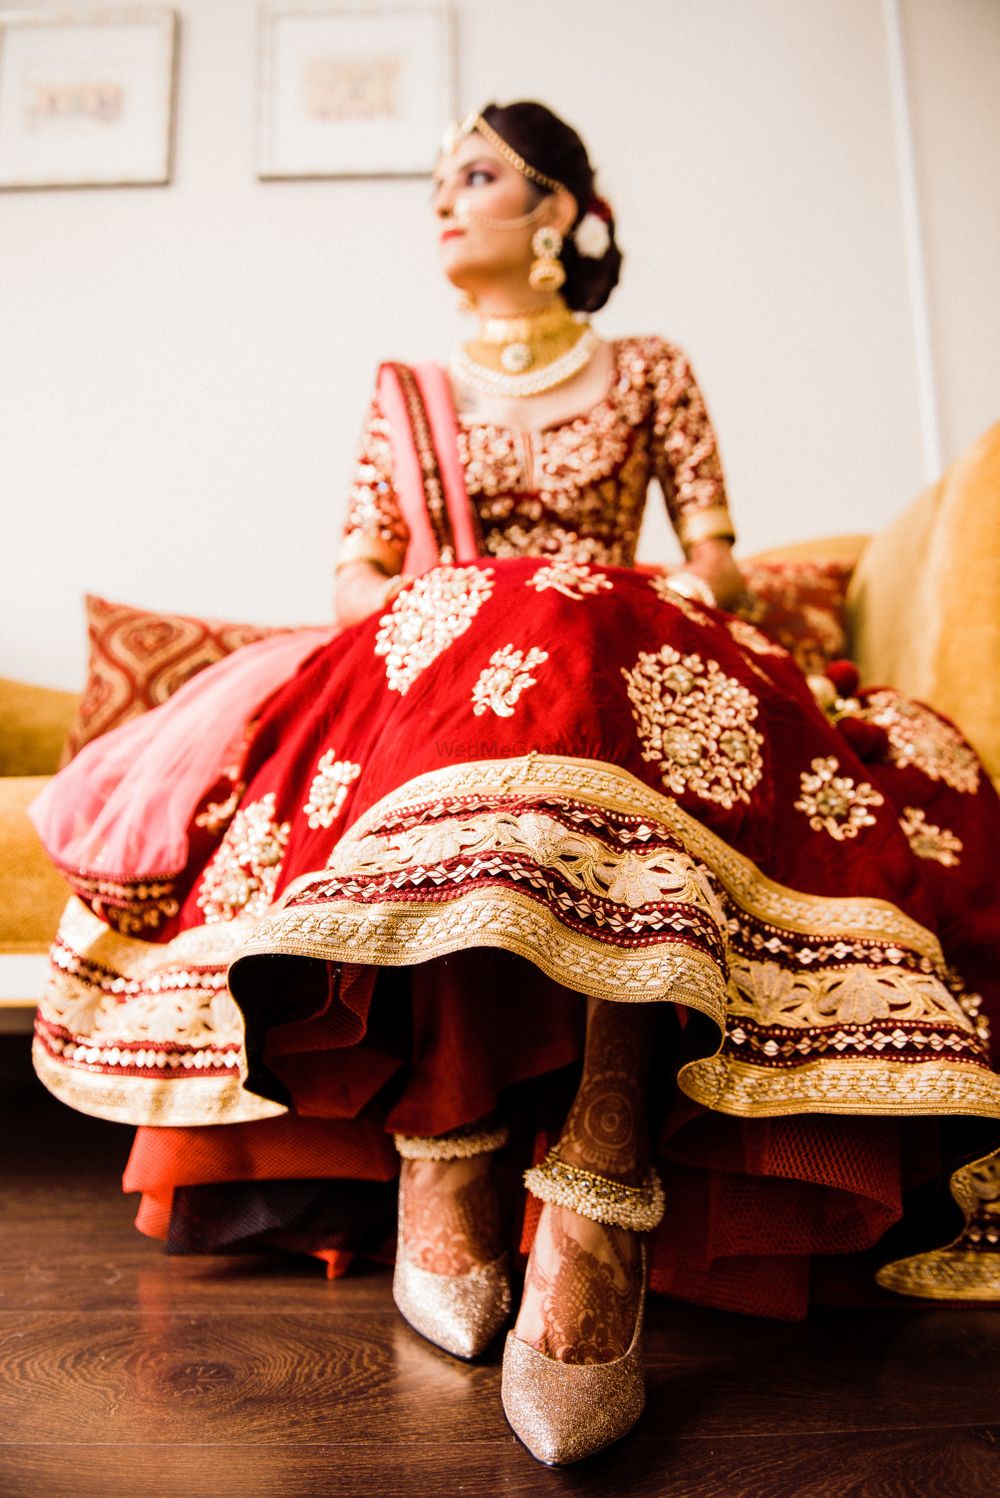 Photo of wedding day bridal portrait with bride showing off lehenga and shoes